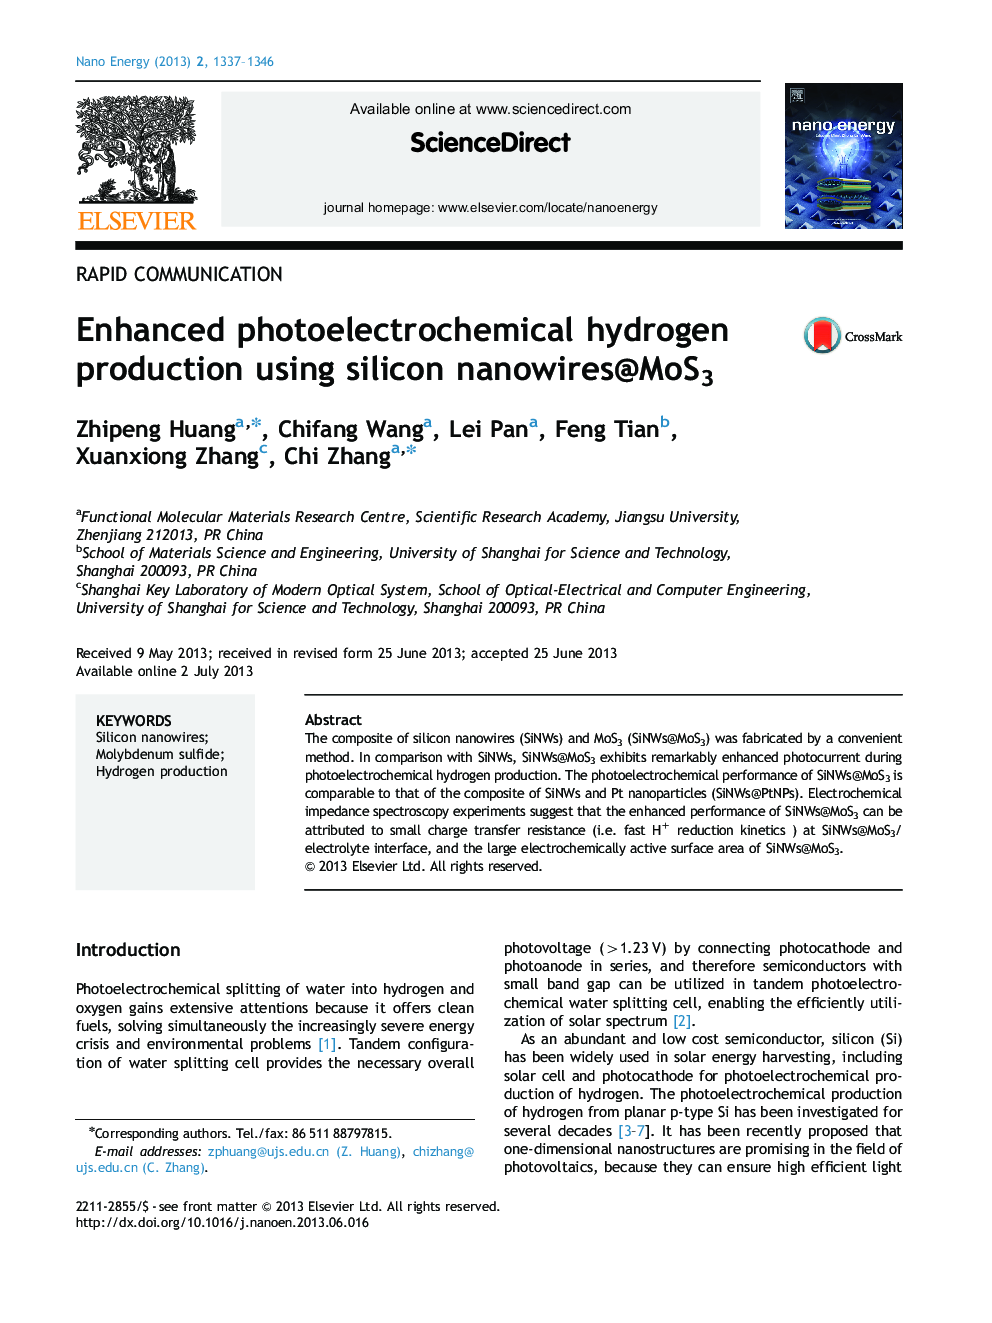 Enhanced photoelectrochemical hydrogen production using silicon nanowires@MoS3